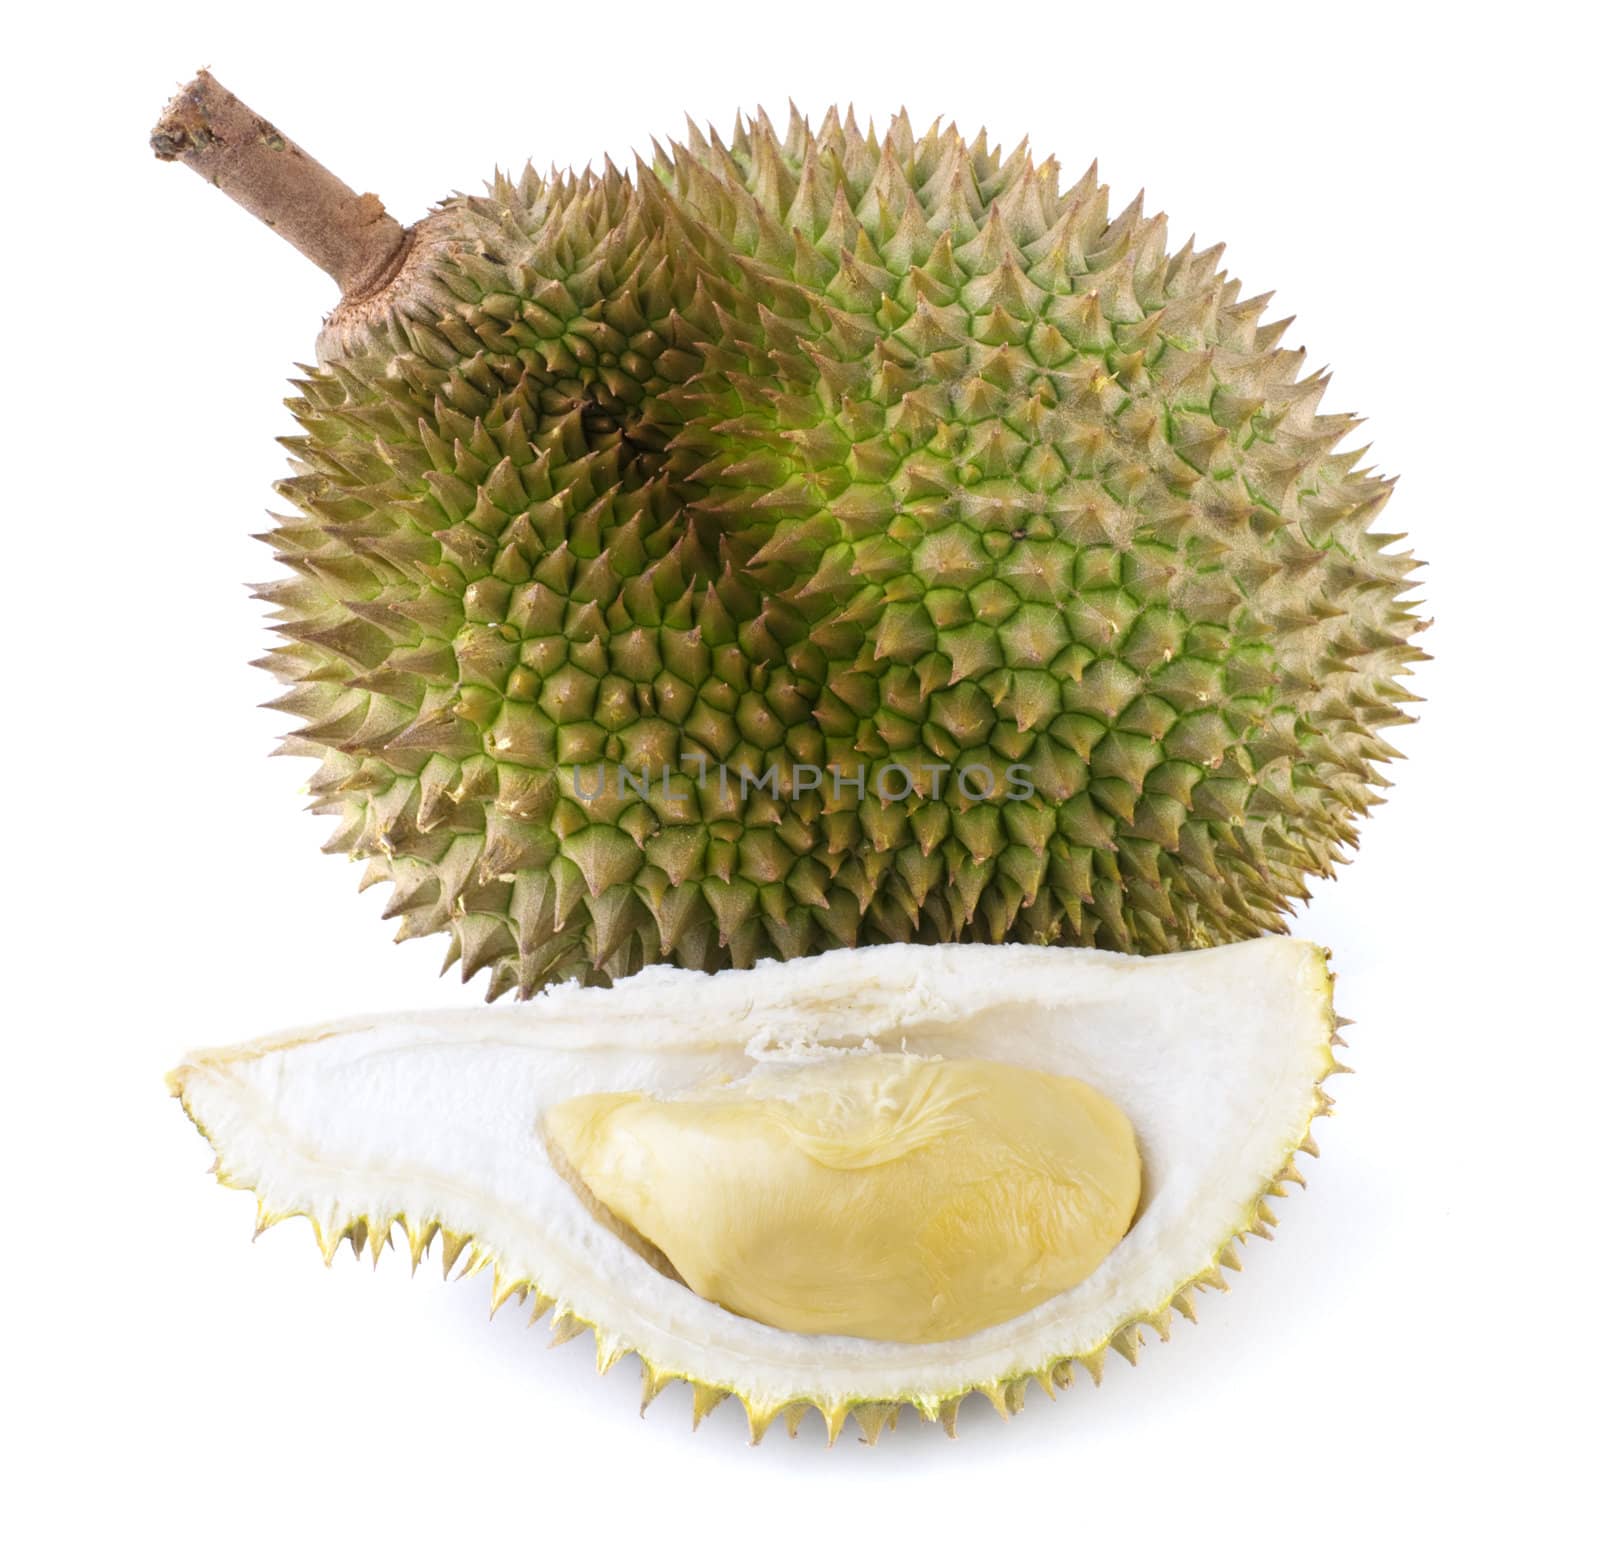 Tropical fruit - Durian isolated on white background.